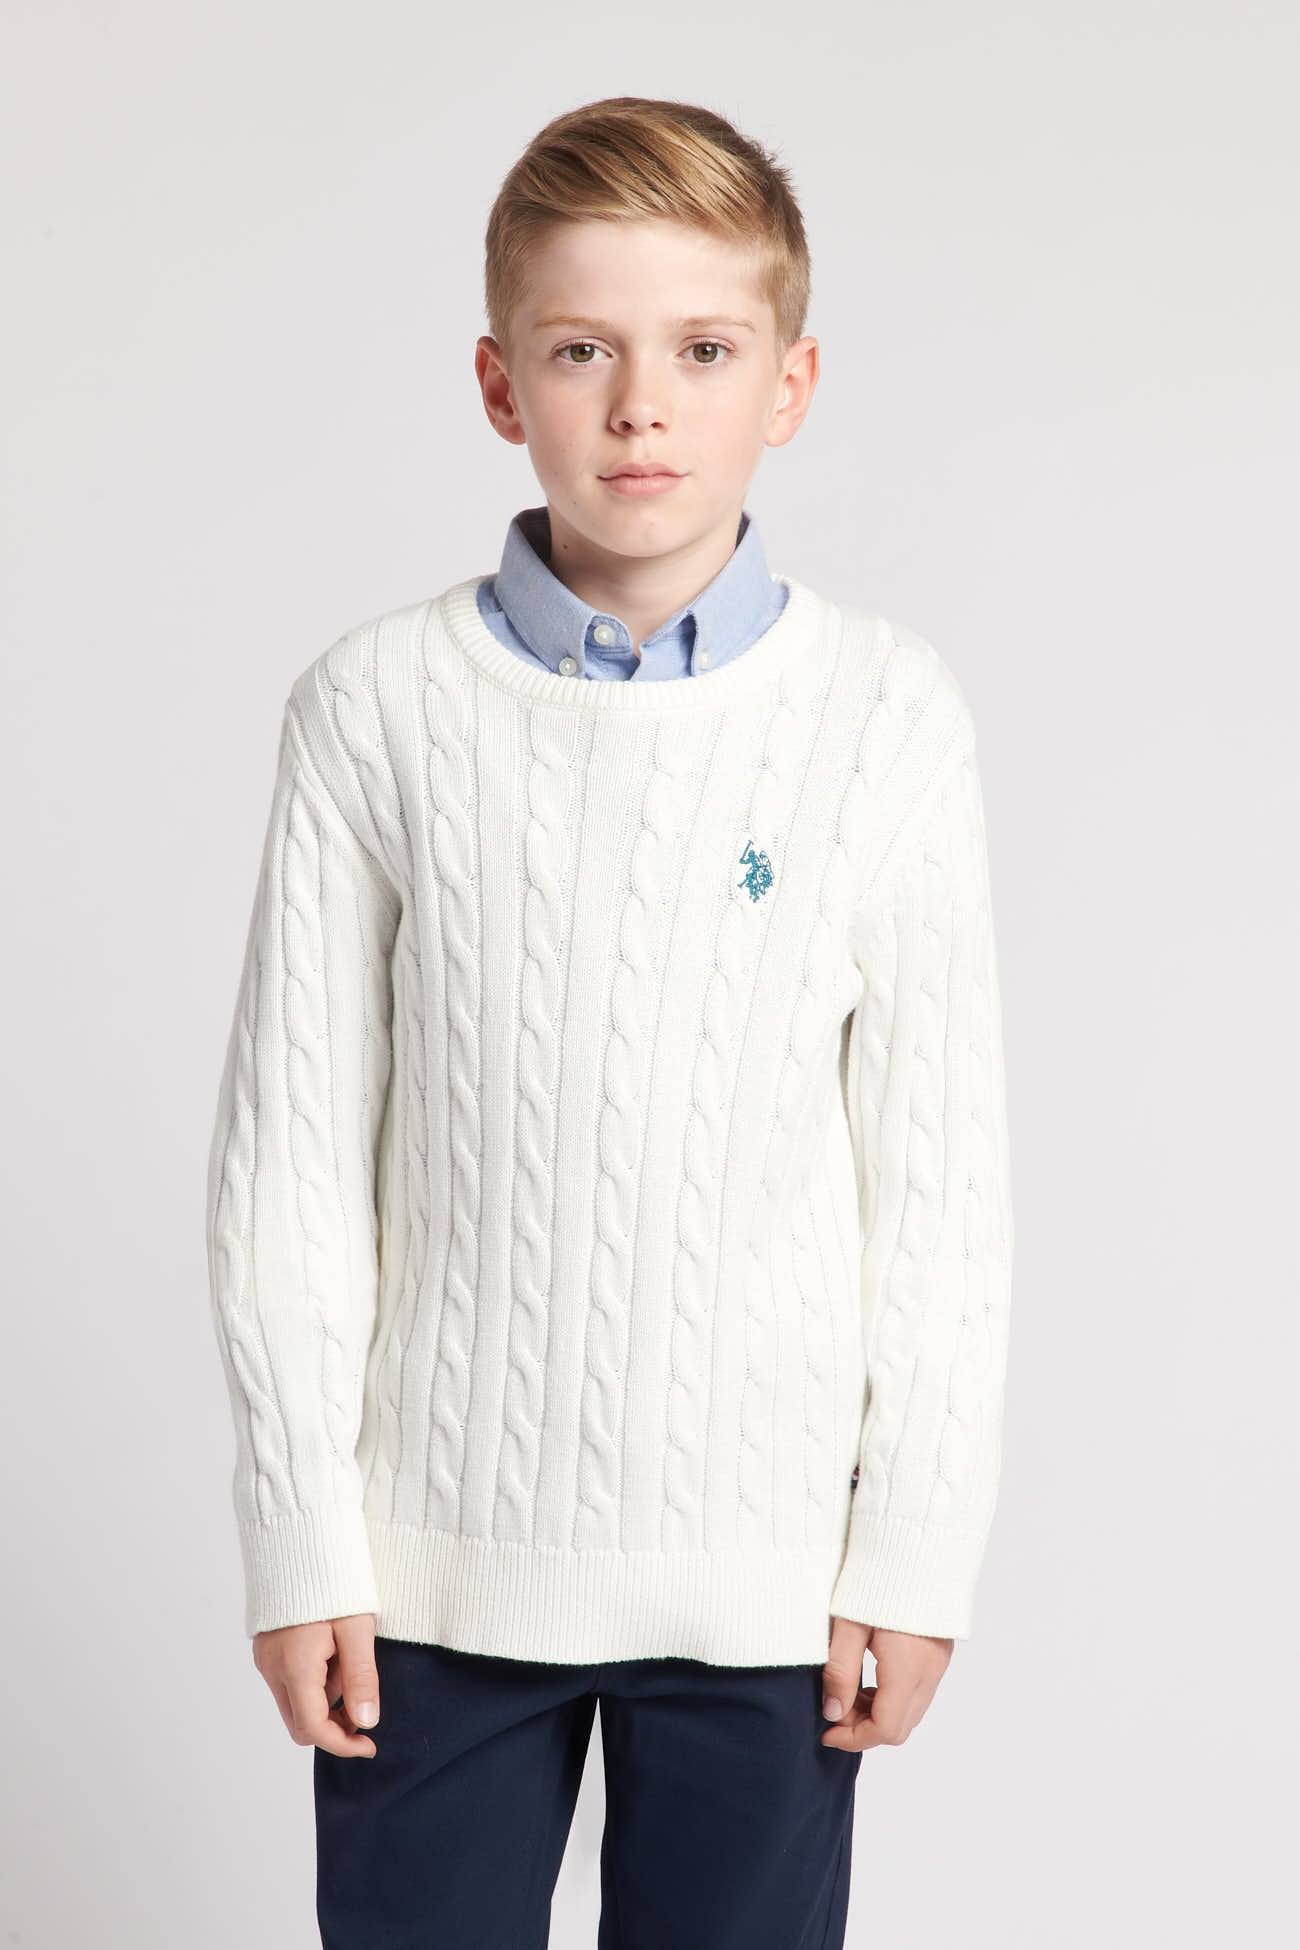 U.S. Polo Assn. Boys Cable Knit Jumper in Marshmallow